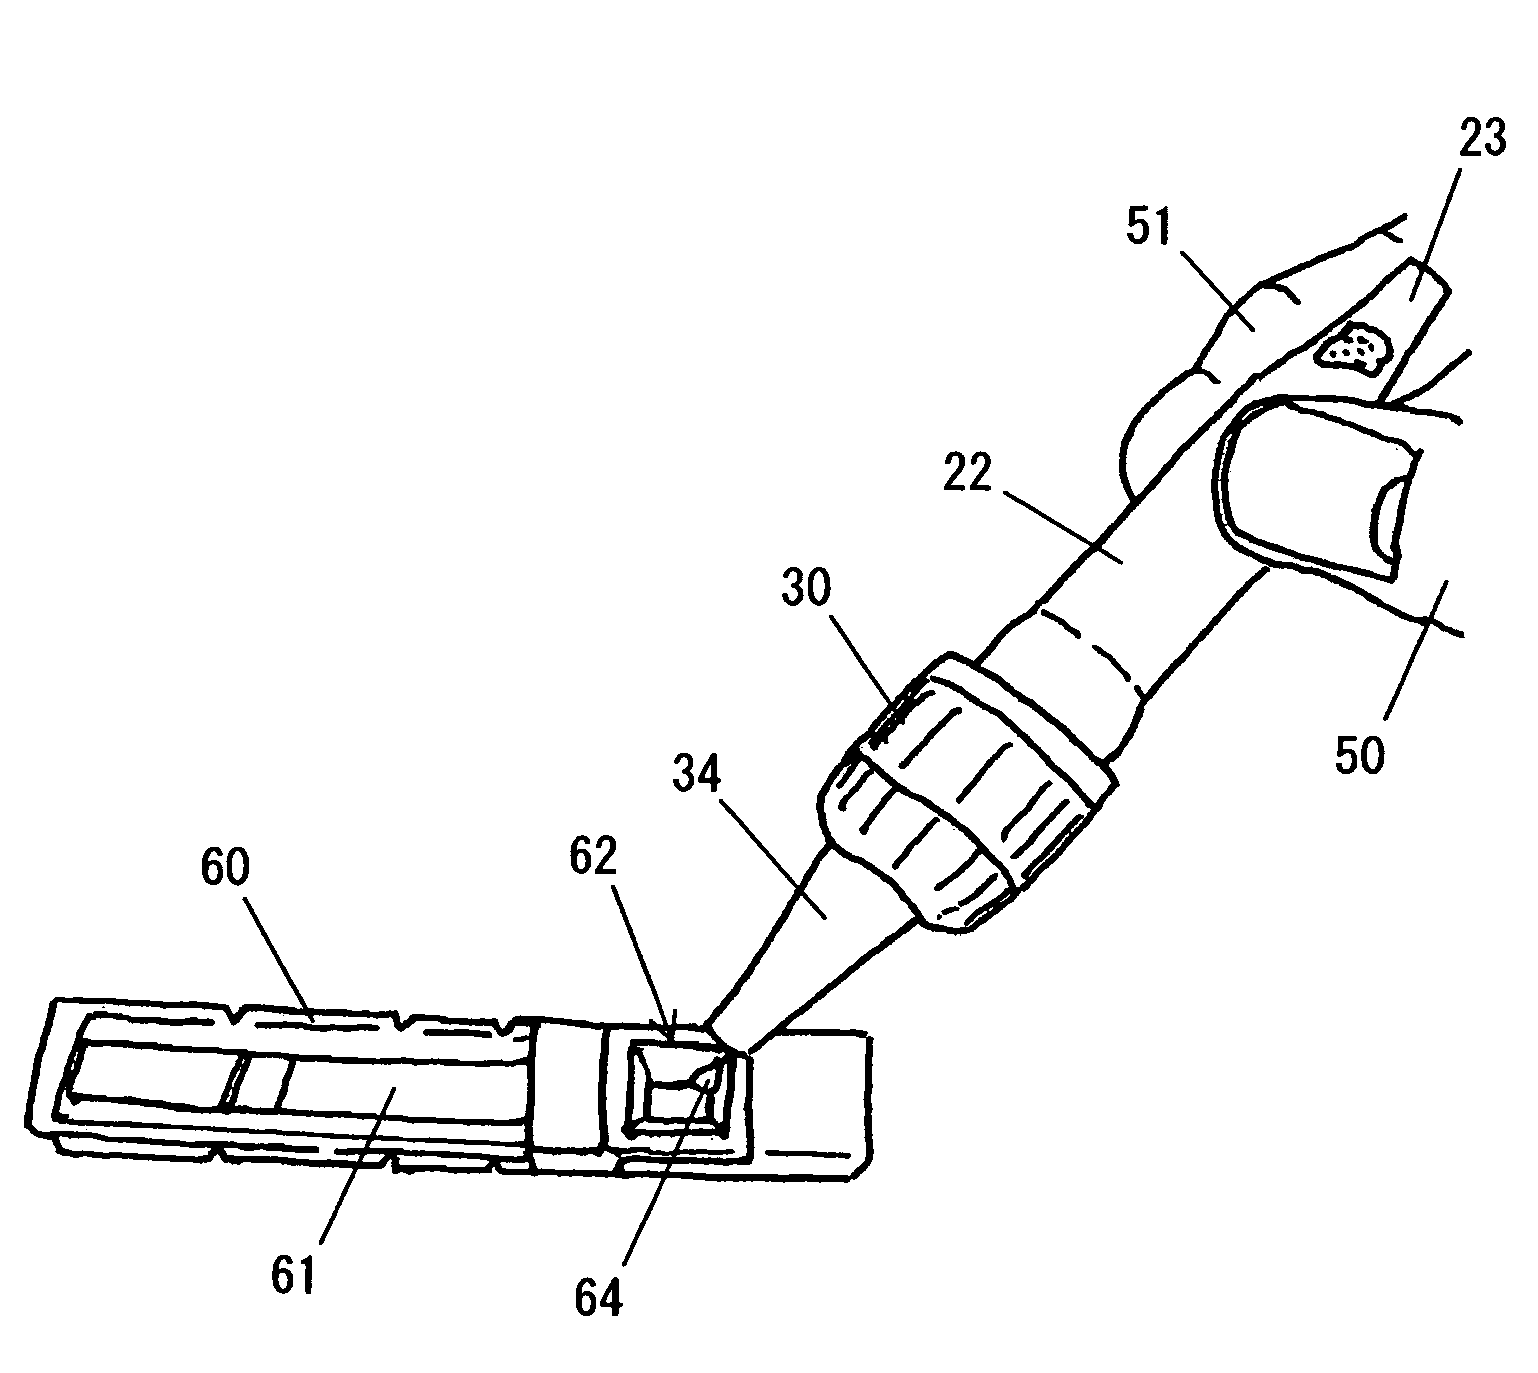 Sample trituration vessel, tool and method using the same